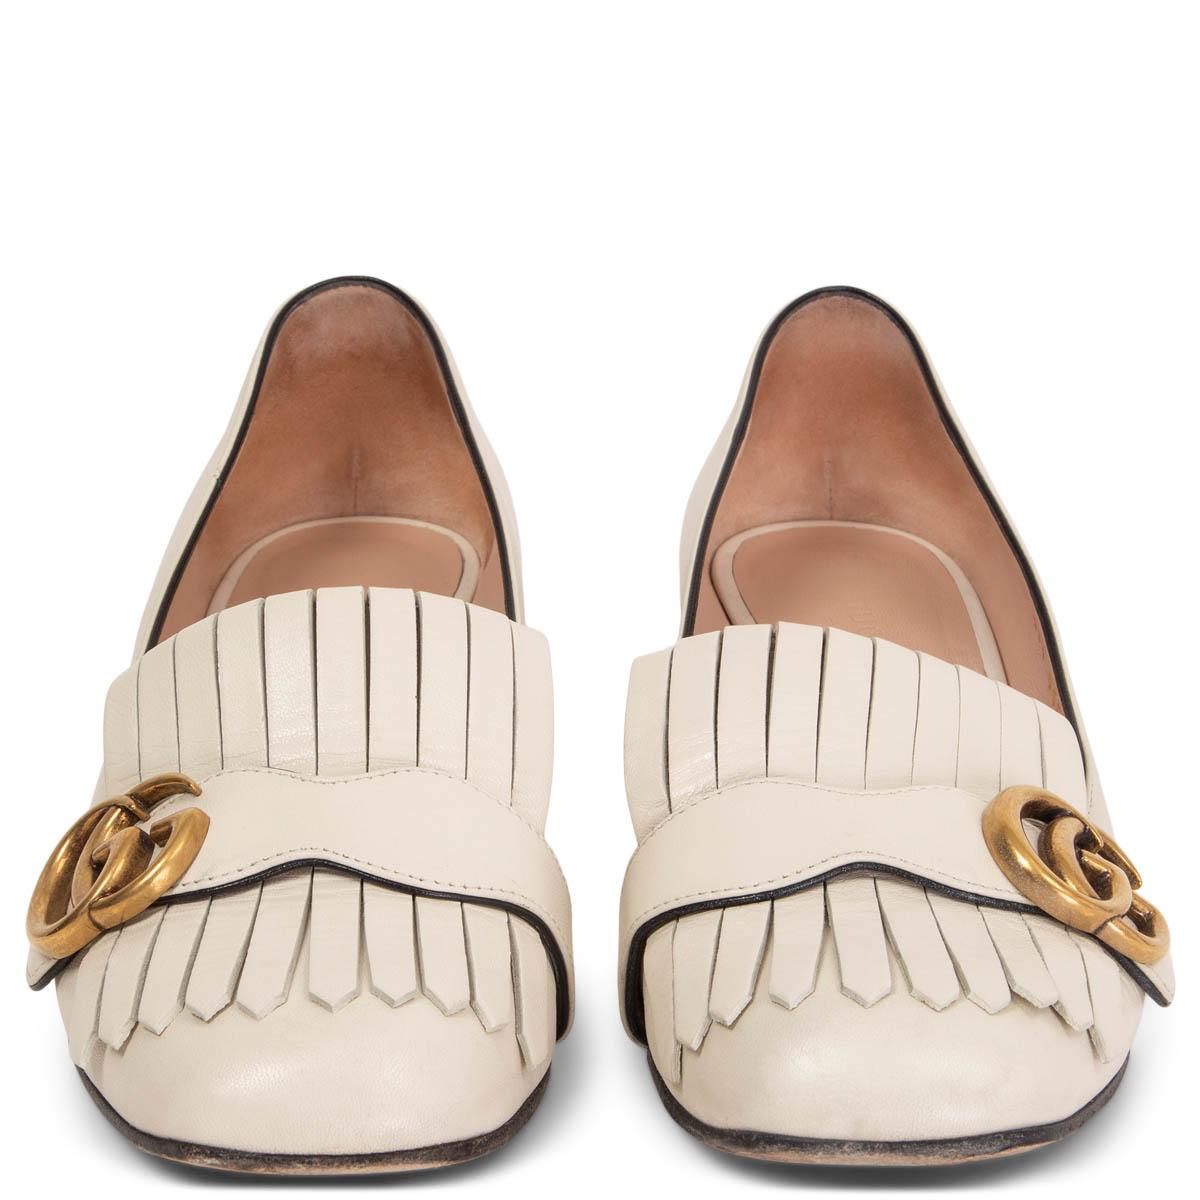 100% authentic Gucci Marmont mid-heel pump in ivory calfskin with Double G antique gold-tone hardware detail on fold over fringe. Have been worn with a scratch on the heel and a small dent. Show a scratch and some soft wear to the tip. Overall in